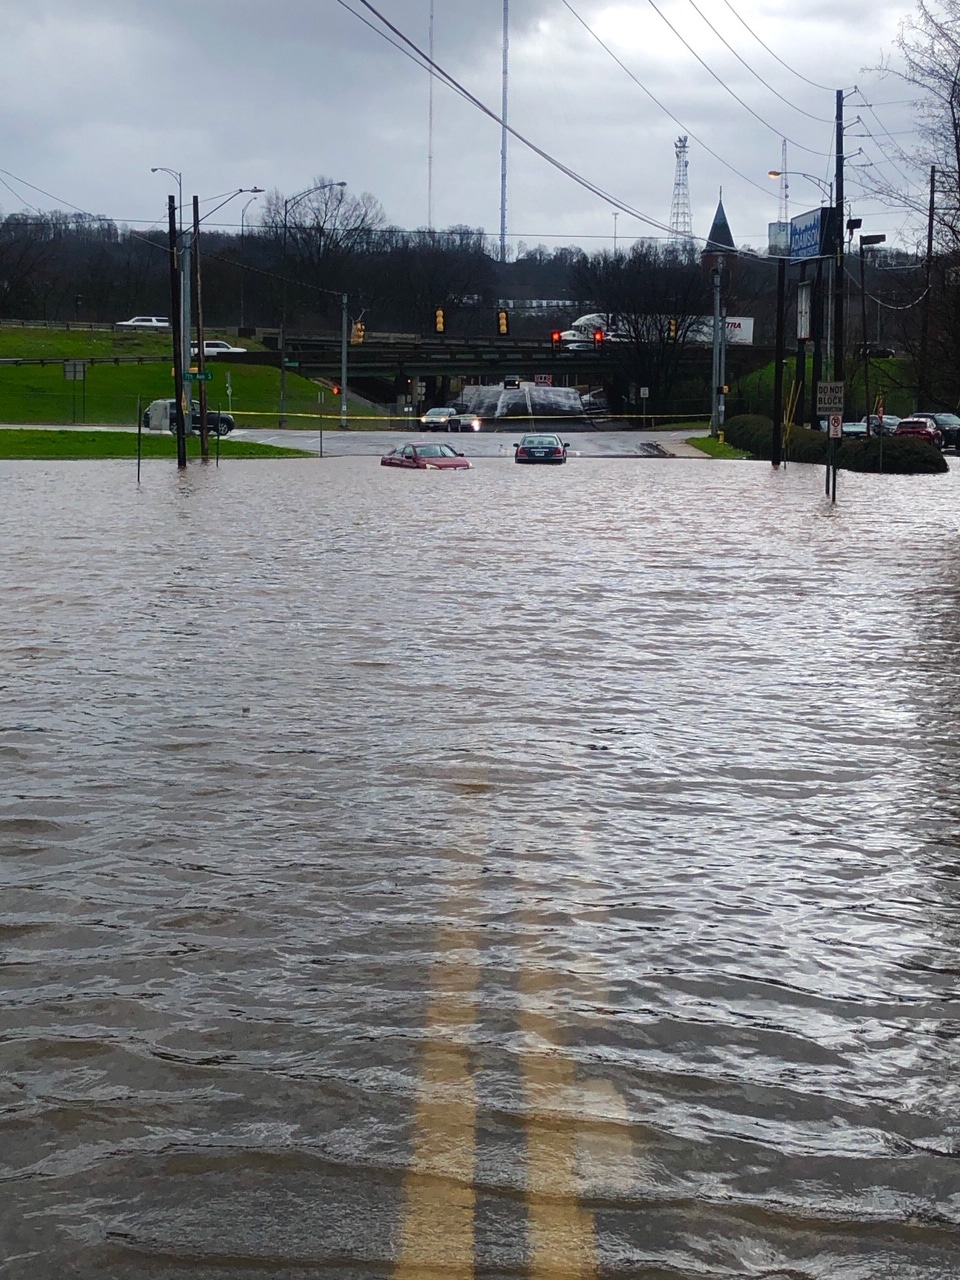 UAB Flooding 2 Be ready Birmingham for flash flood warnings. Here are tips to stay safe.